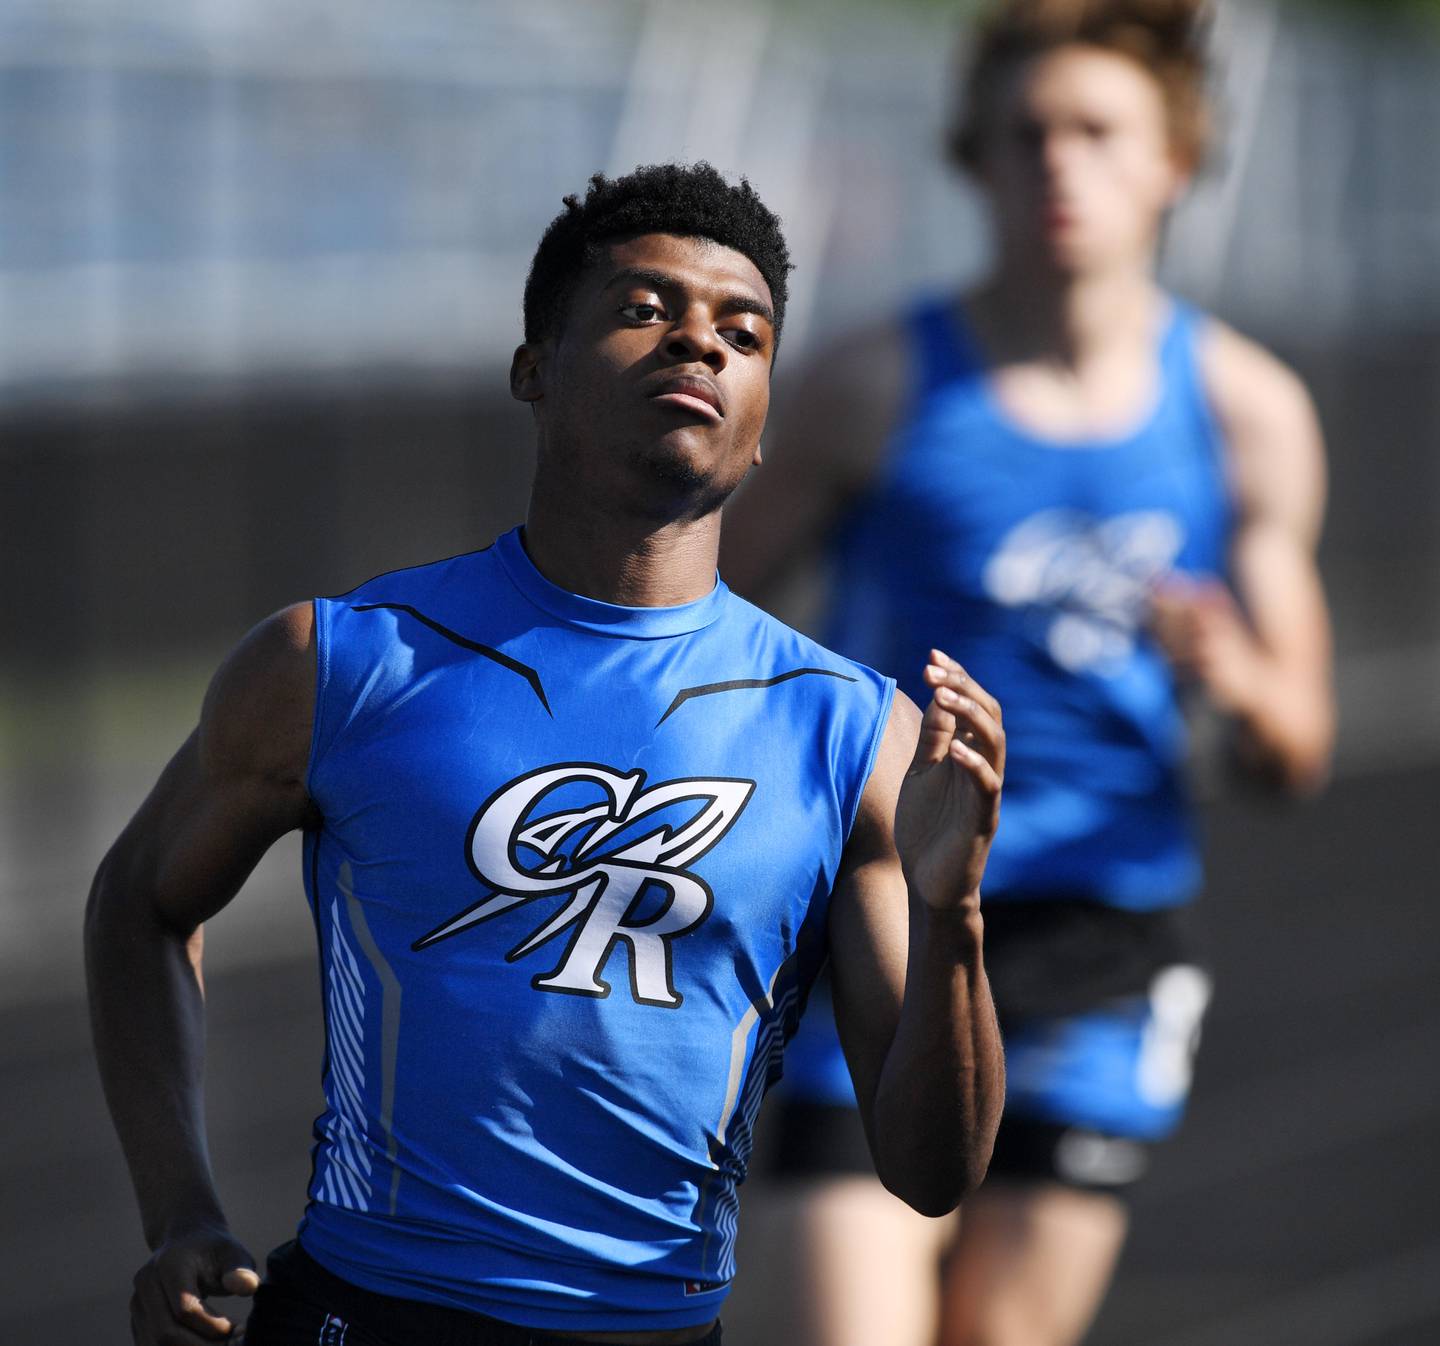 Burlington Central's Jacoby Haynes leads teammate Zac Schmidt in the 400-meter dash at a Class 2A boys track sectional meet in Glen Ellyn on Thursday, June 10, 2021.